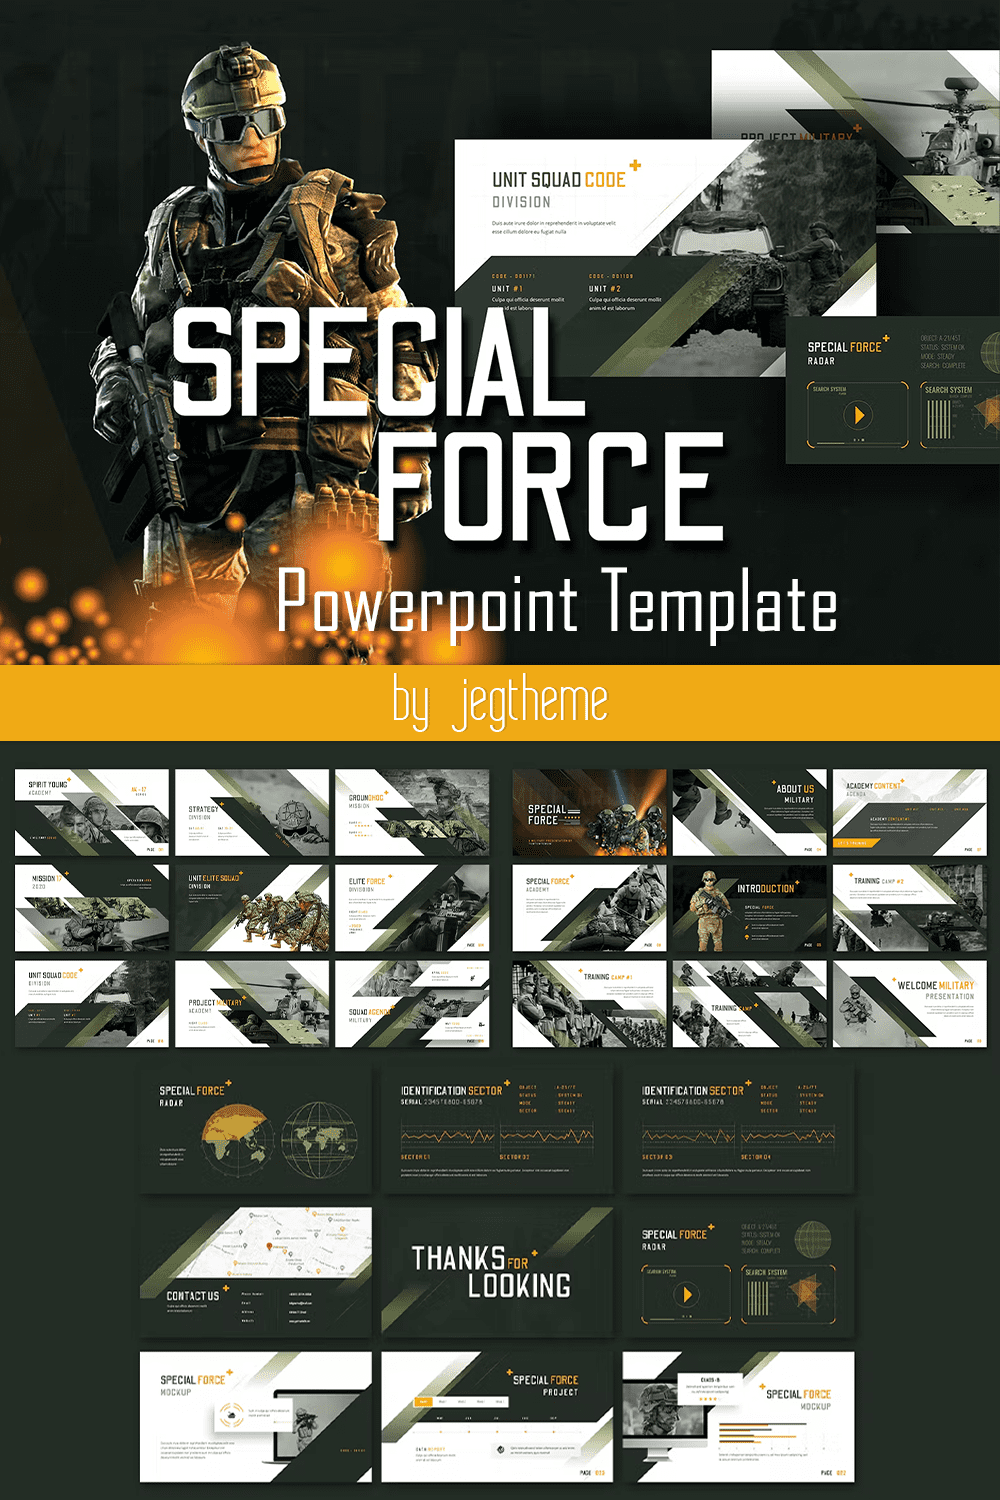 Special Force - Powerpoint Template - Pinterest.